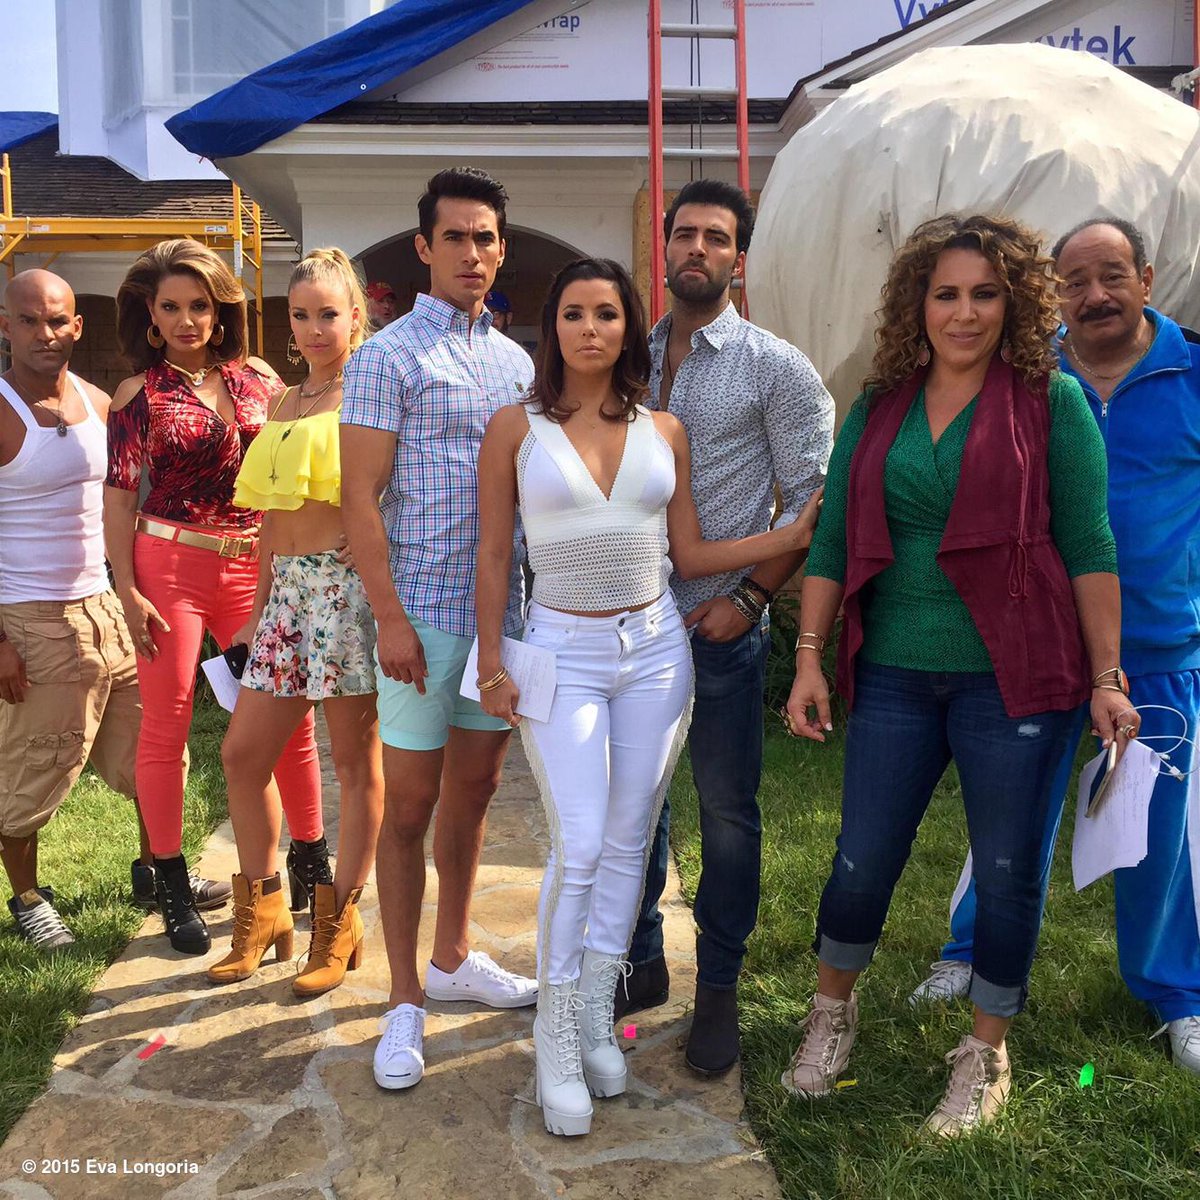 This is our cast looking bad ass! (Ok well trying to anyway...)  @NBCHotandBothered http://t.co/juWhHoFDPc